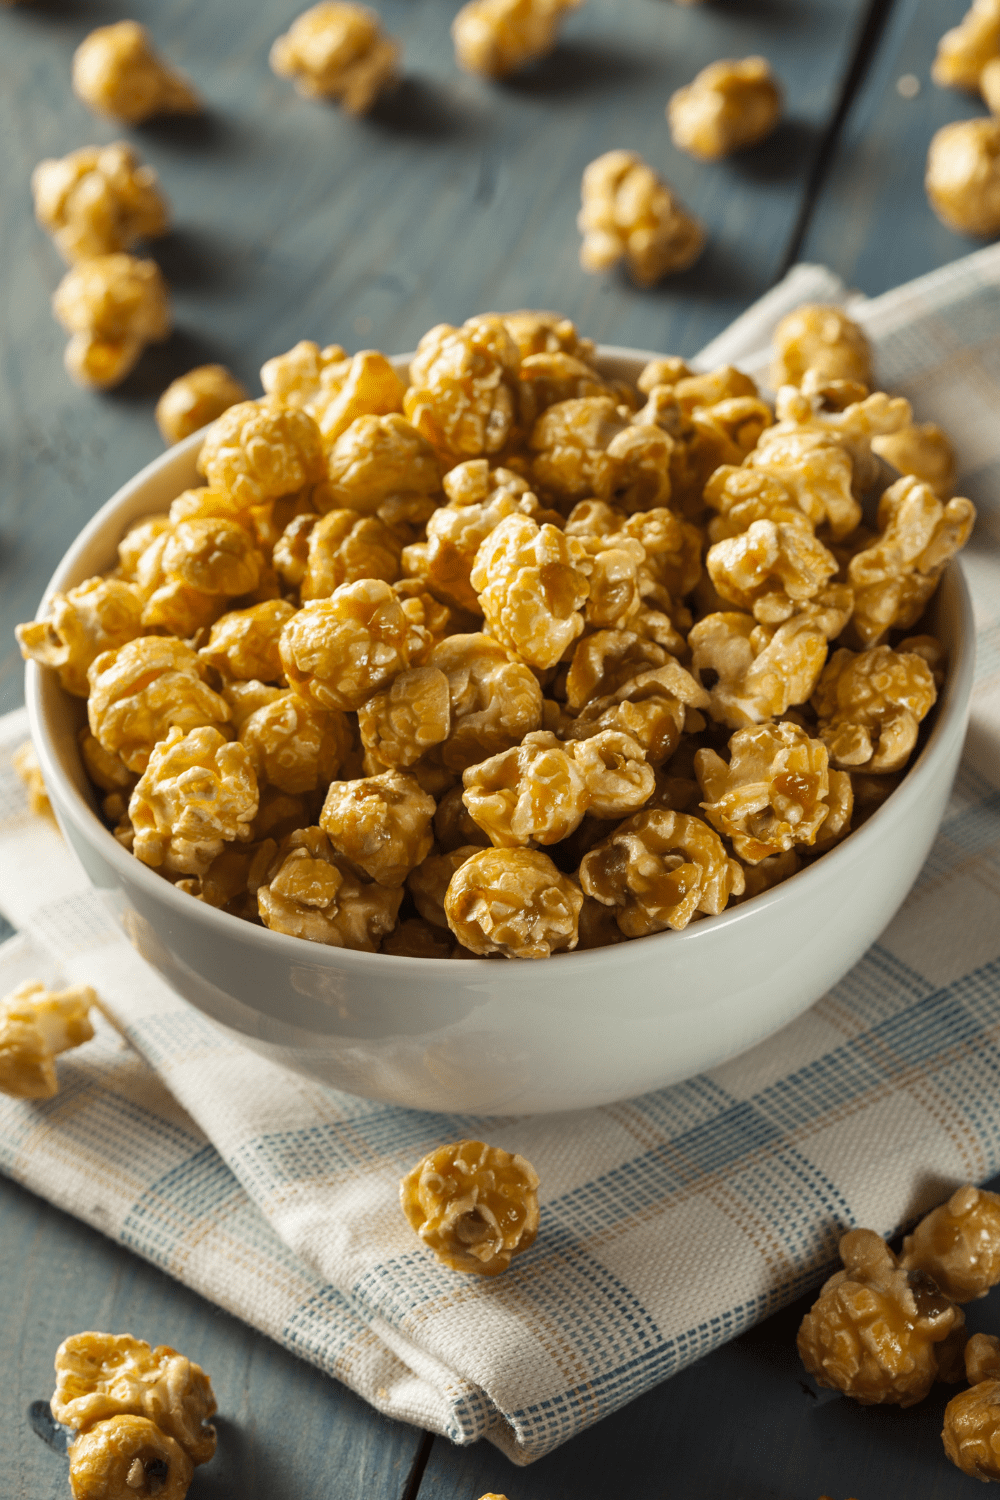 is caramel corn good for you